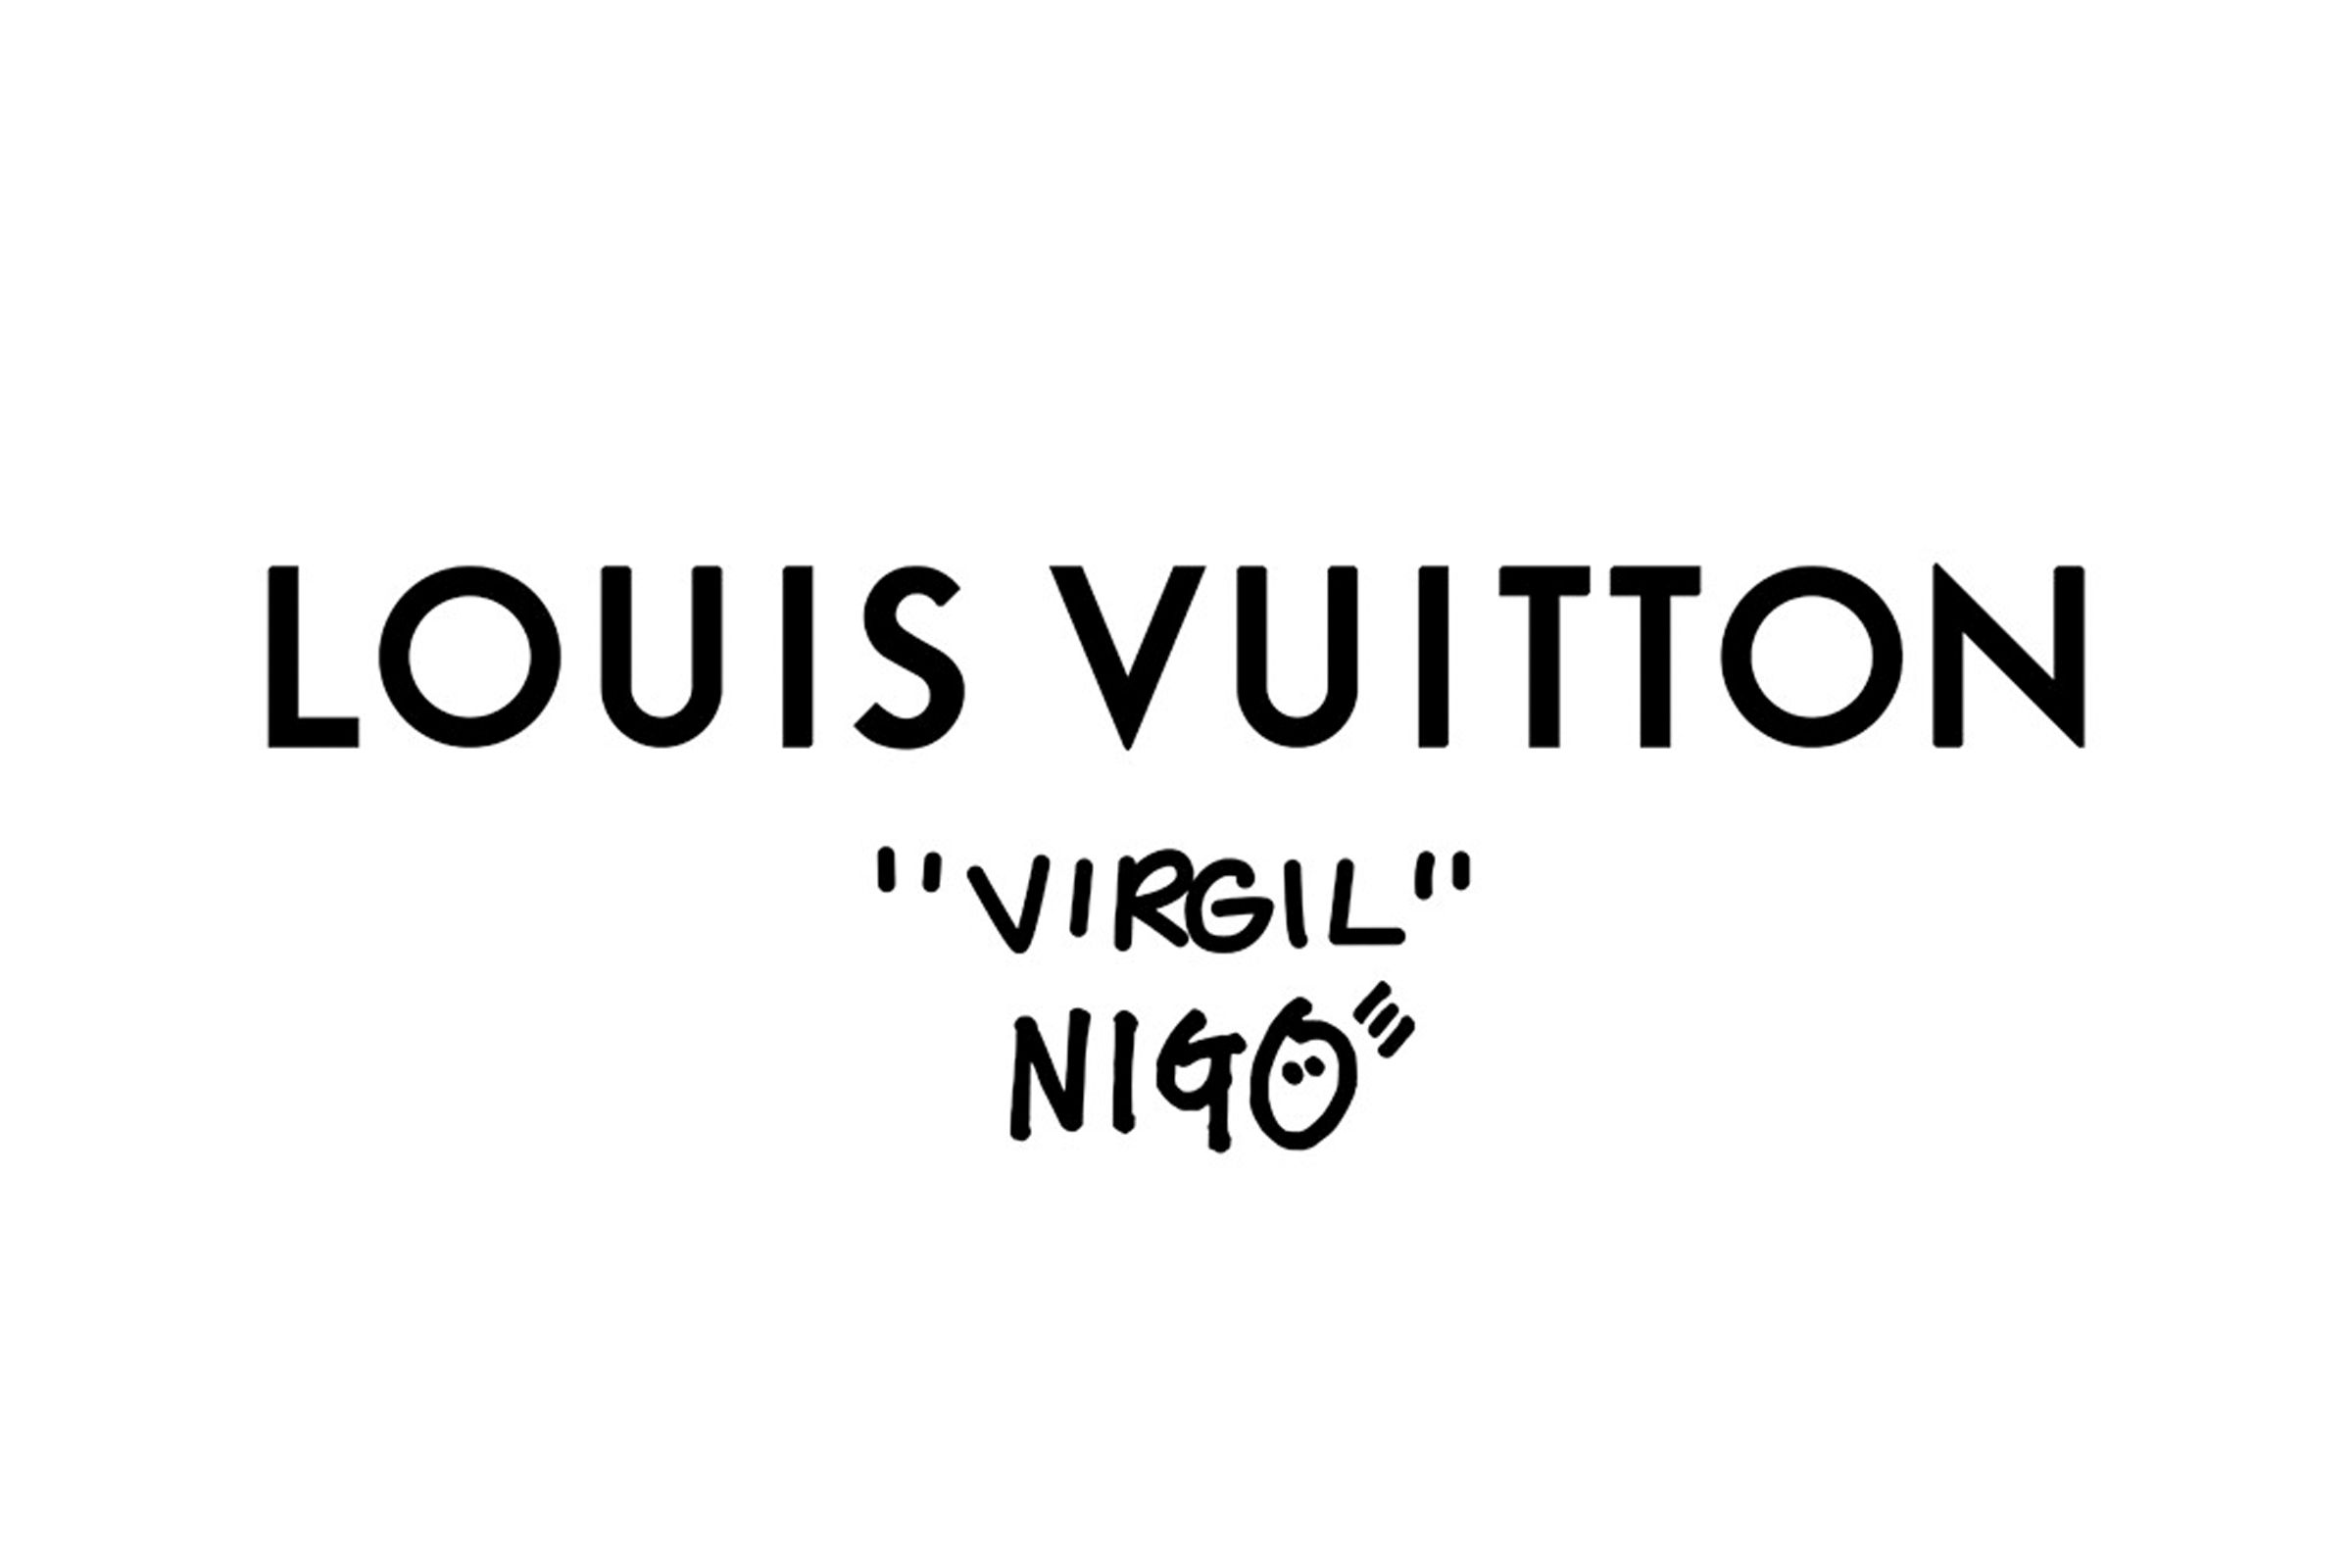 See All The Pieces From The Second Drop Of Louis Vuitton x Nigo LV²  Collection Here